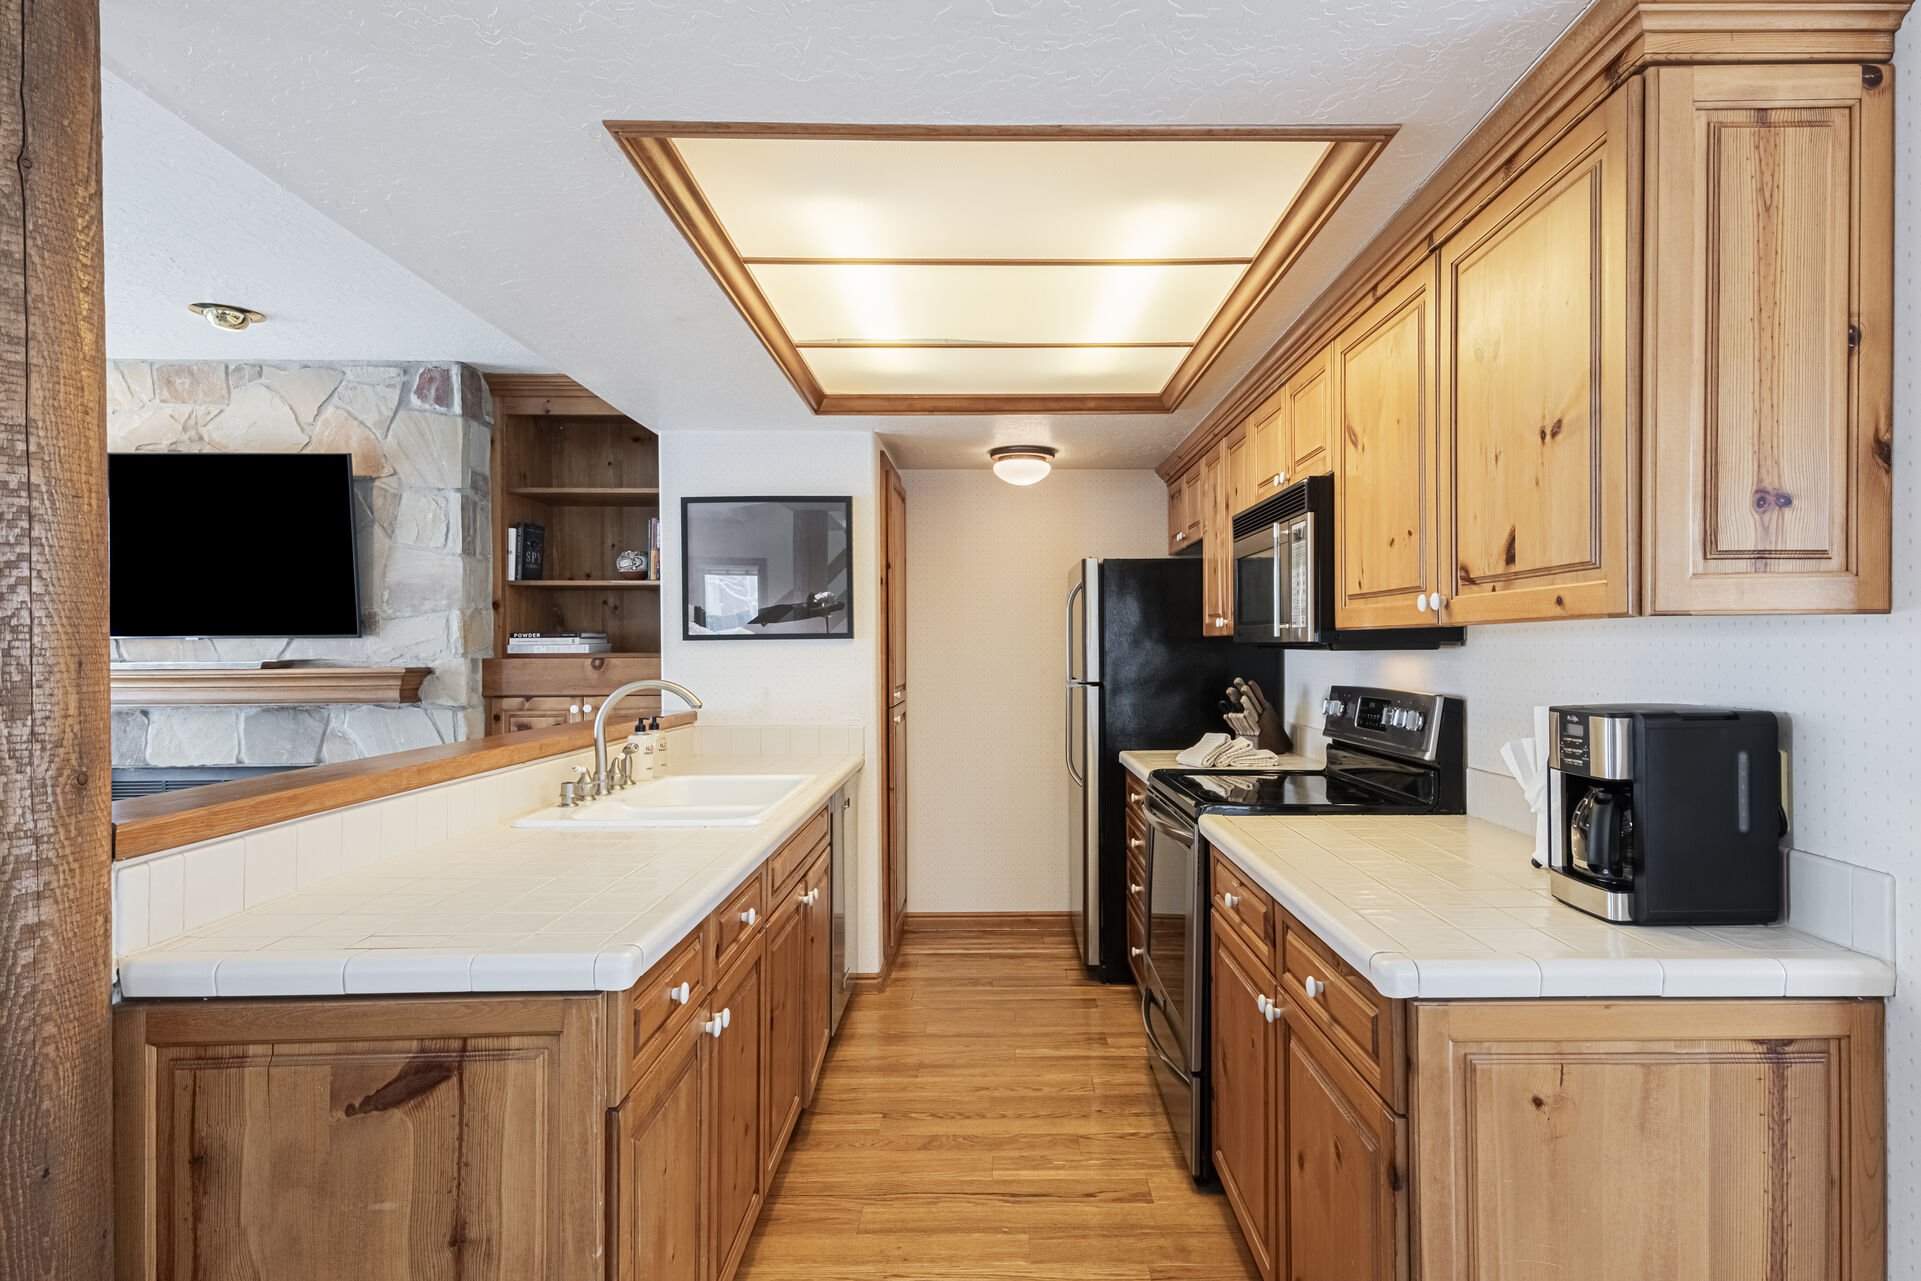 Fully Equipped Kitchen with Spacious Countertops and Stainless Steel Appliances